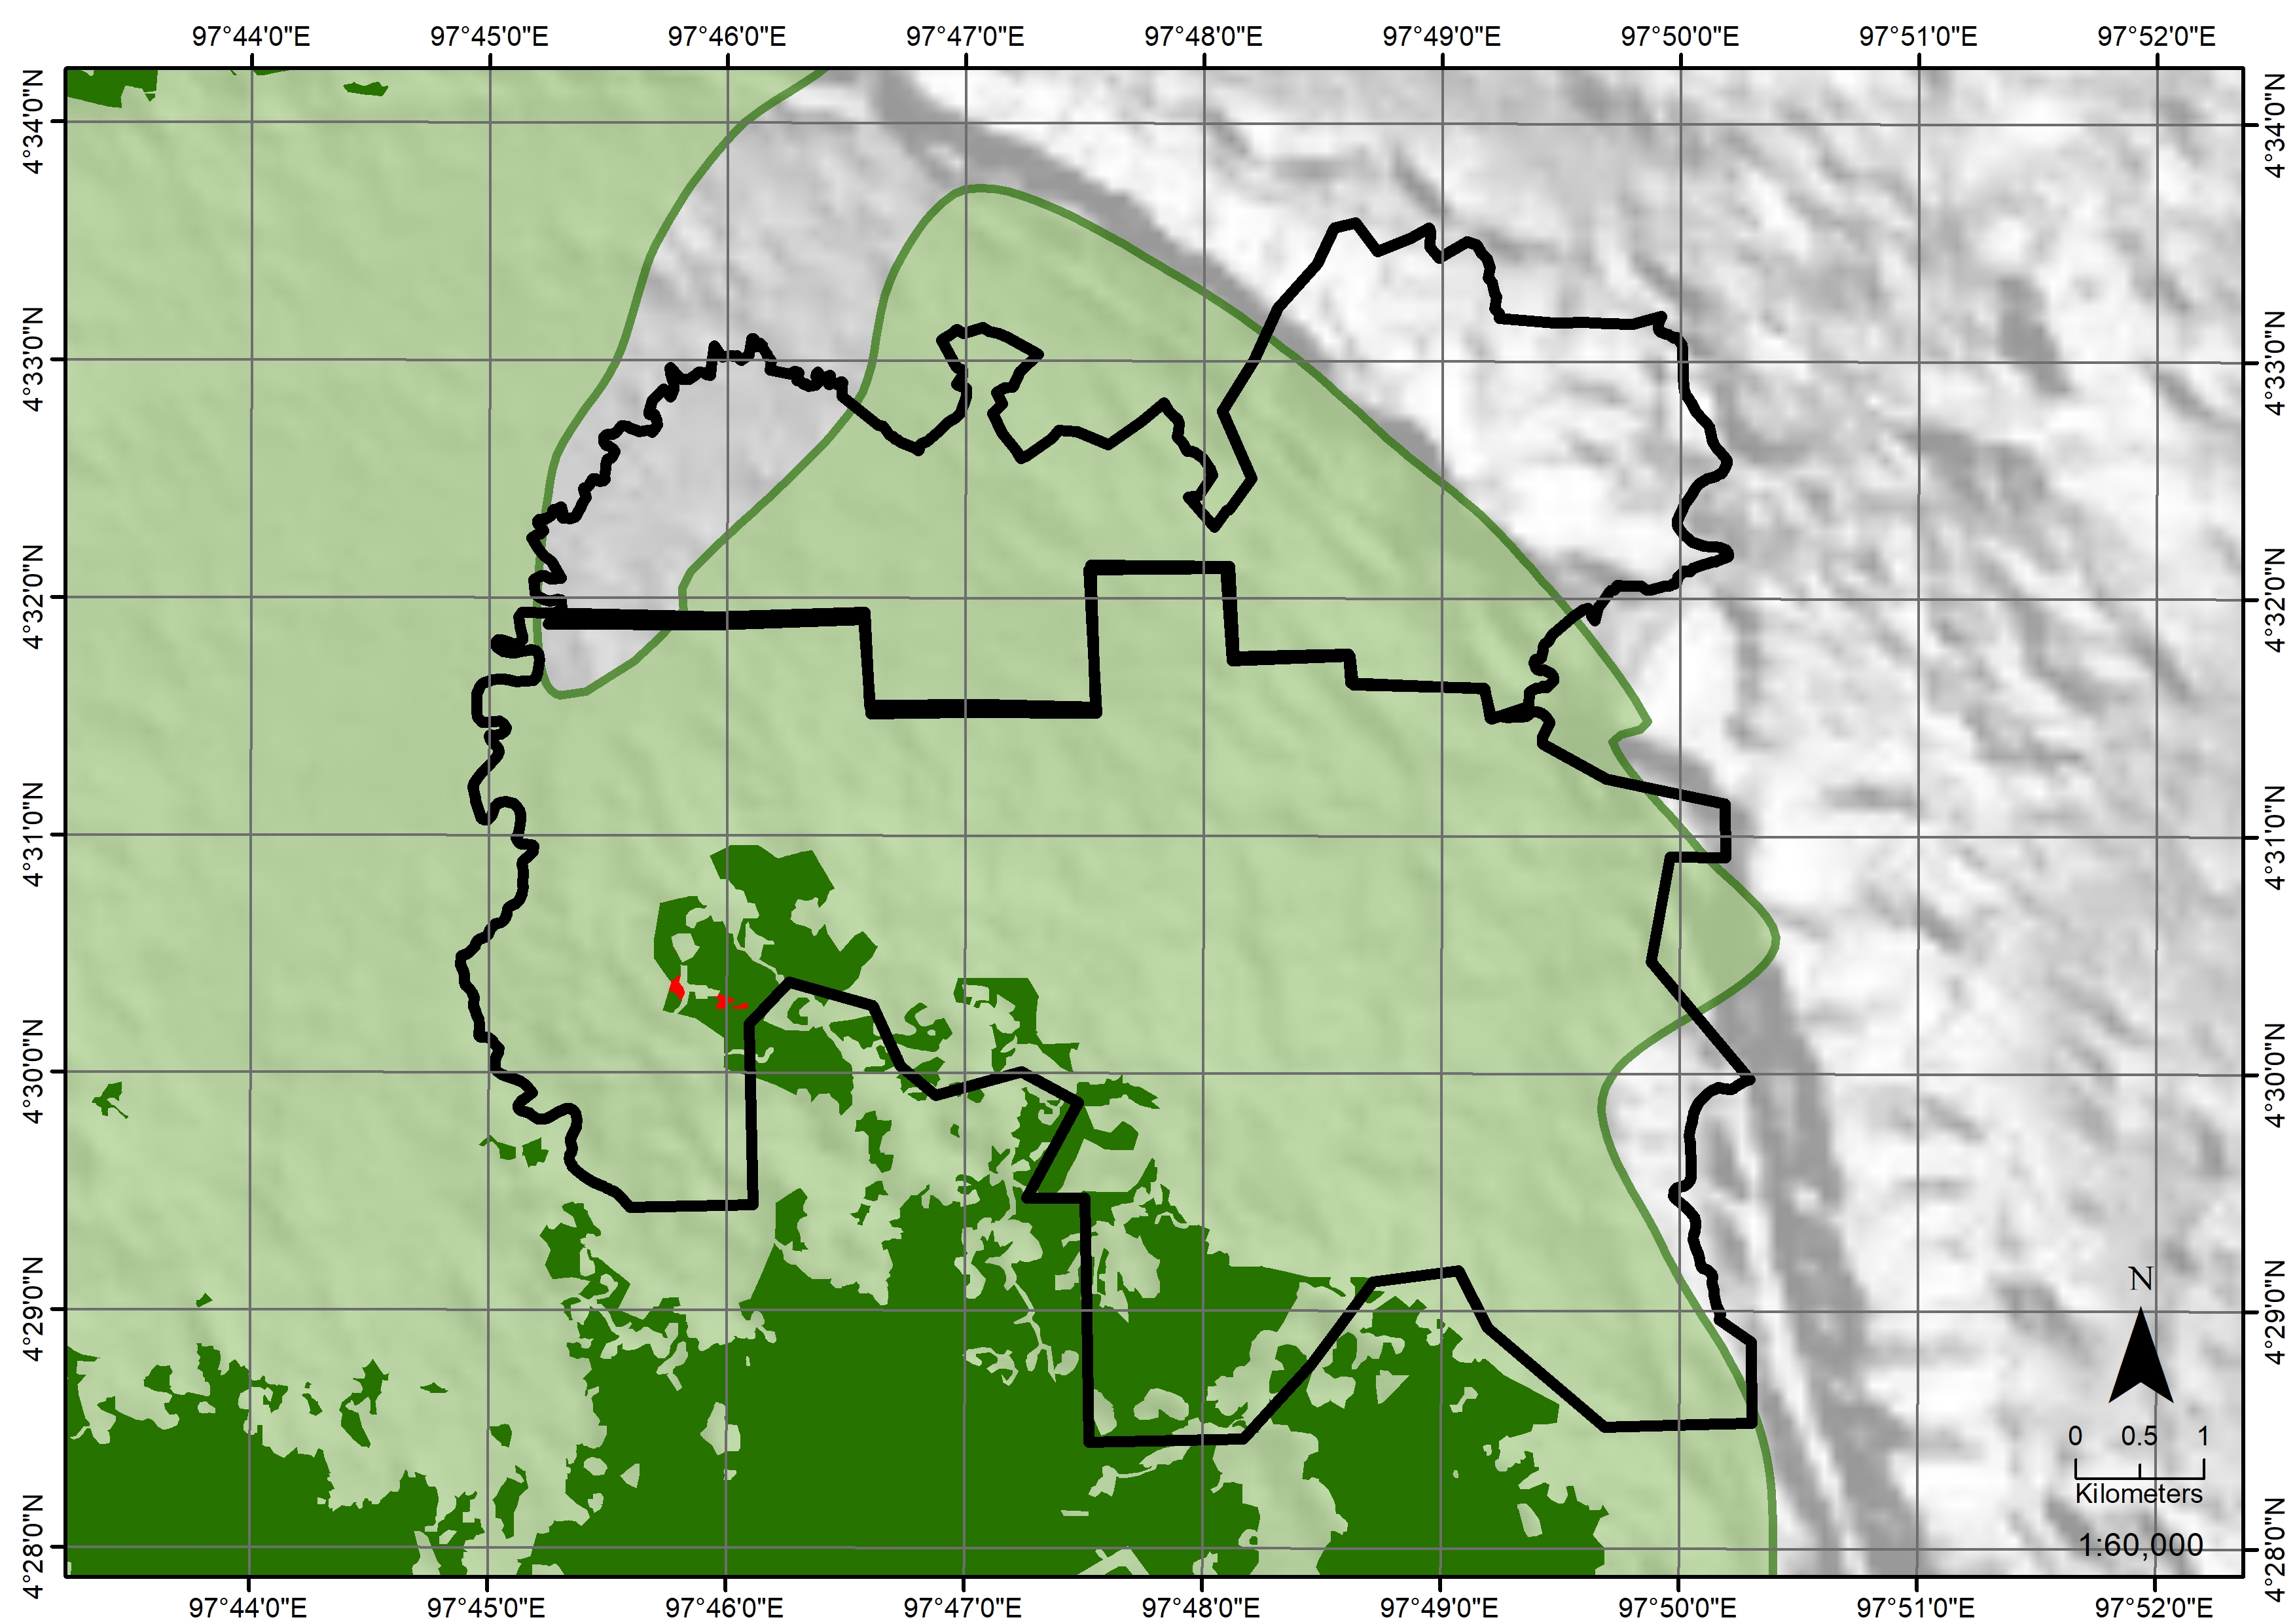 October 2018 satellite analysis showing forest clearance activity inside PTPN I Blang Tualang’s palm oil concessions within the Leuser Ecosystem